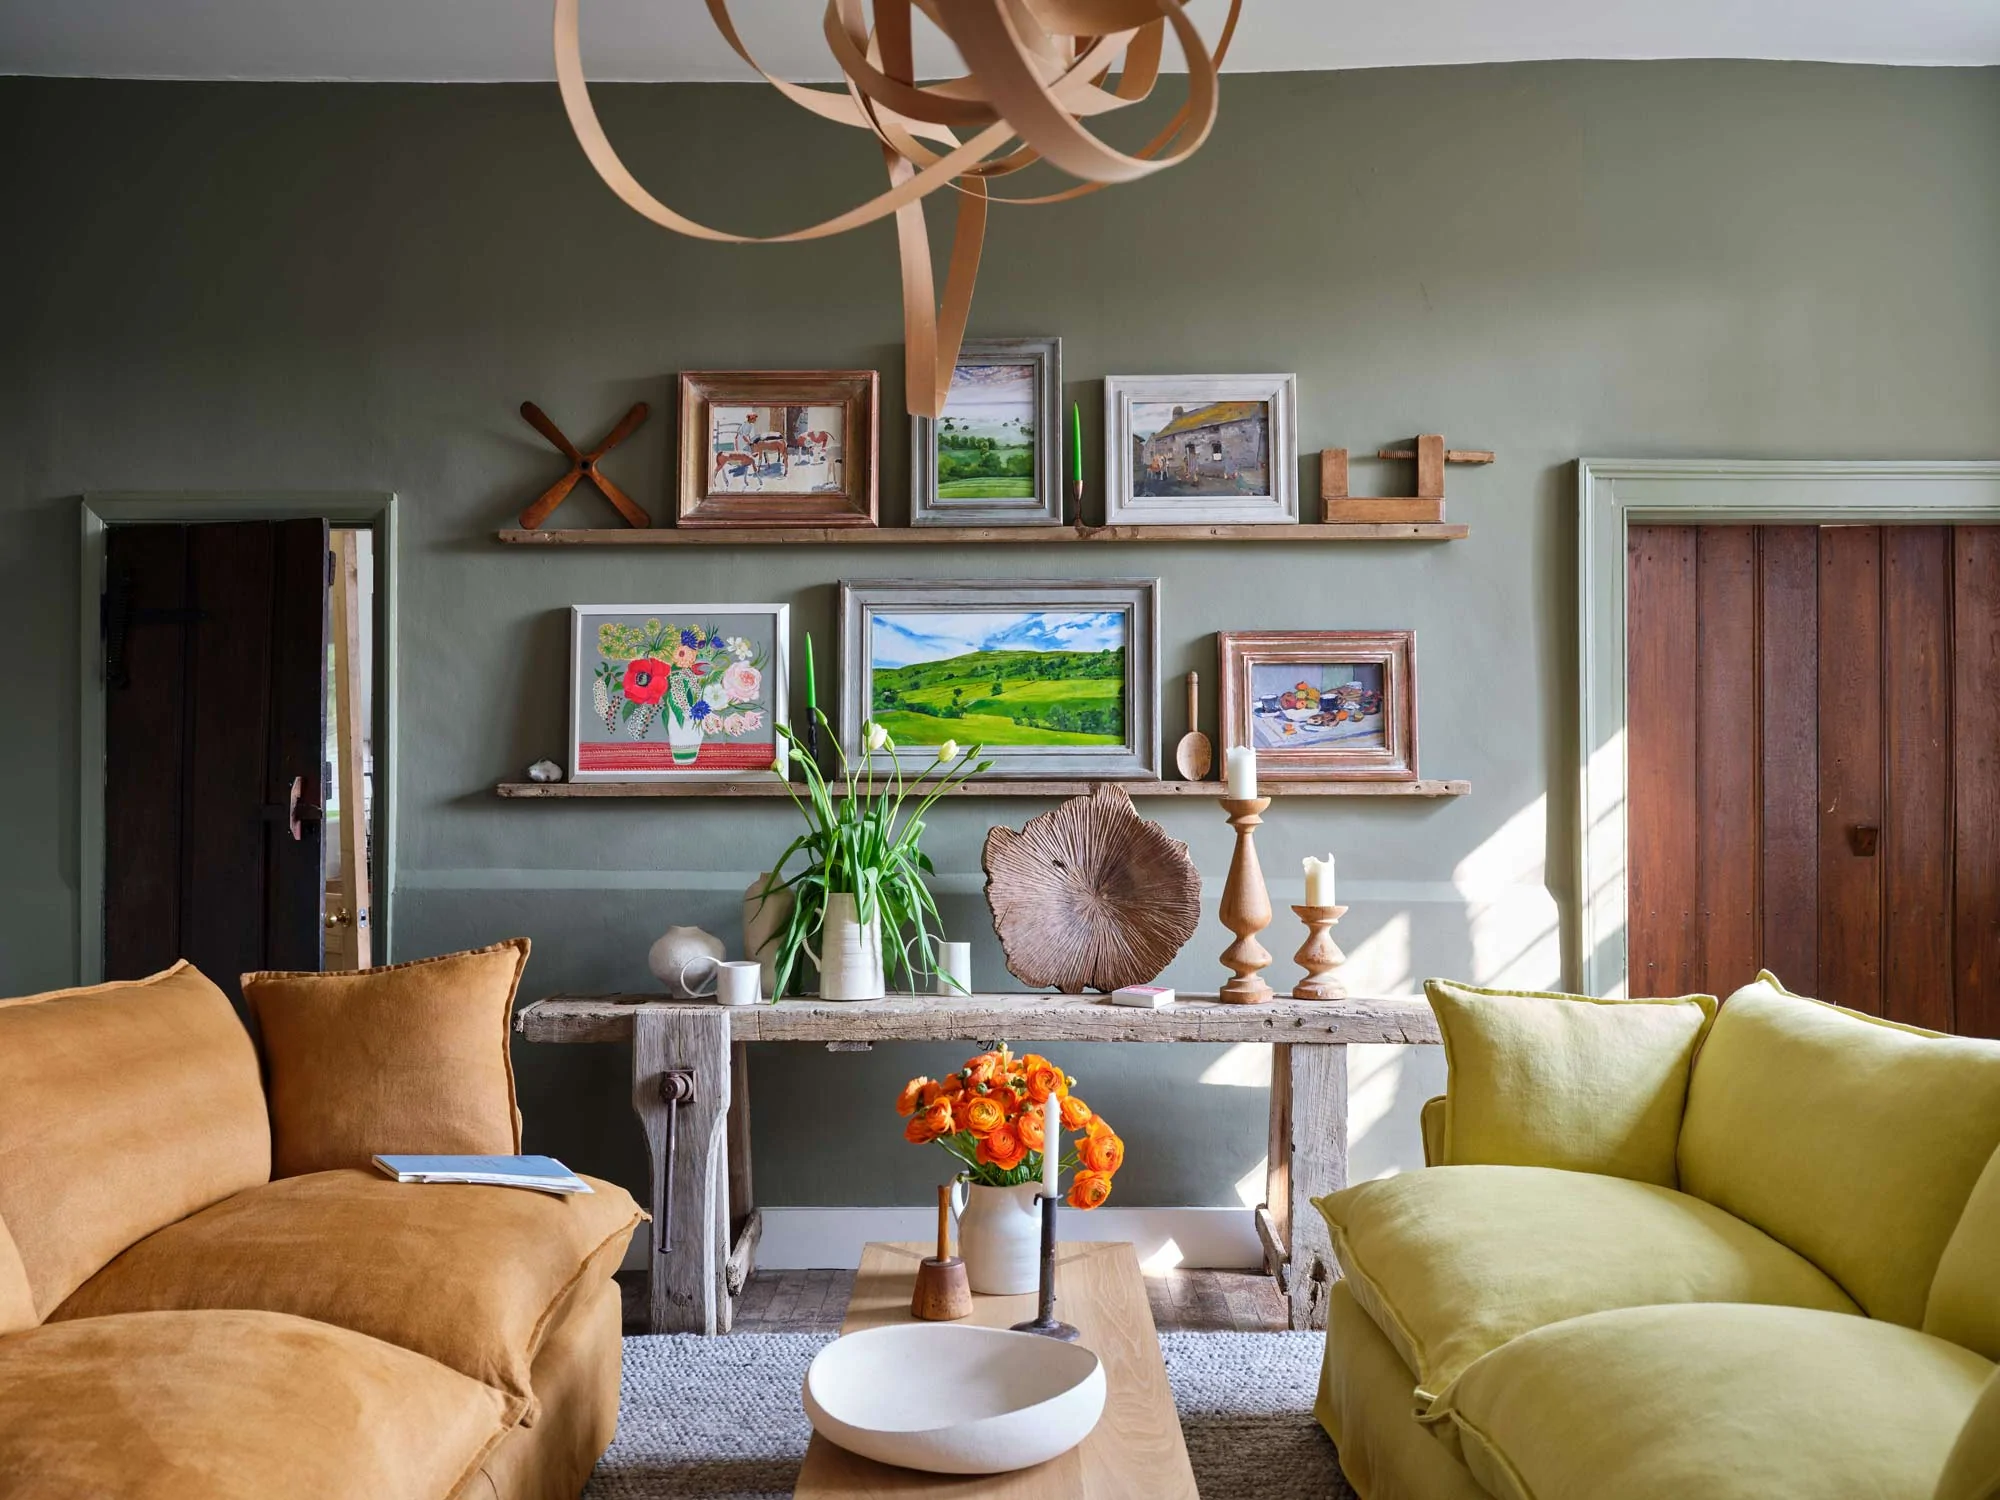 A soft warm moss green room with a citrine yellow and brown bronzite sofa facing each other with a birch coffee table in between The walls are covered in paintings and decorations in 3 horizontal rows Against the wall is a rustic wooden side table with candles a vase of white tulips and a wooden sculptural bowl